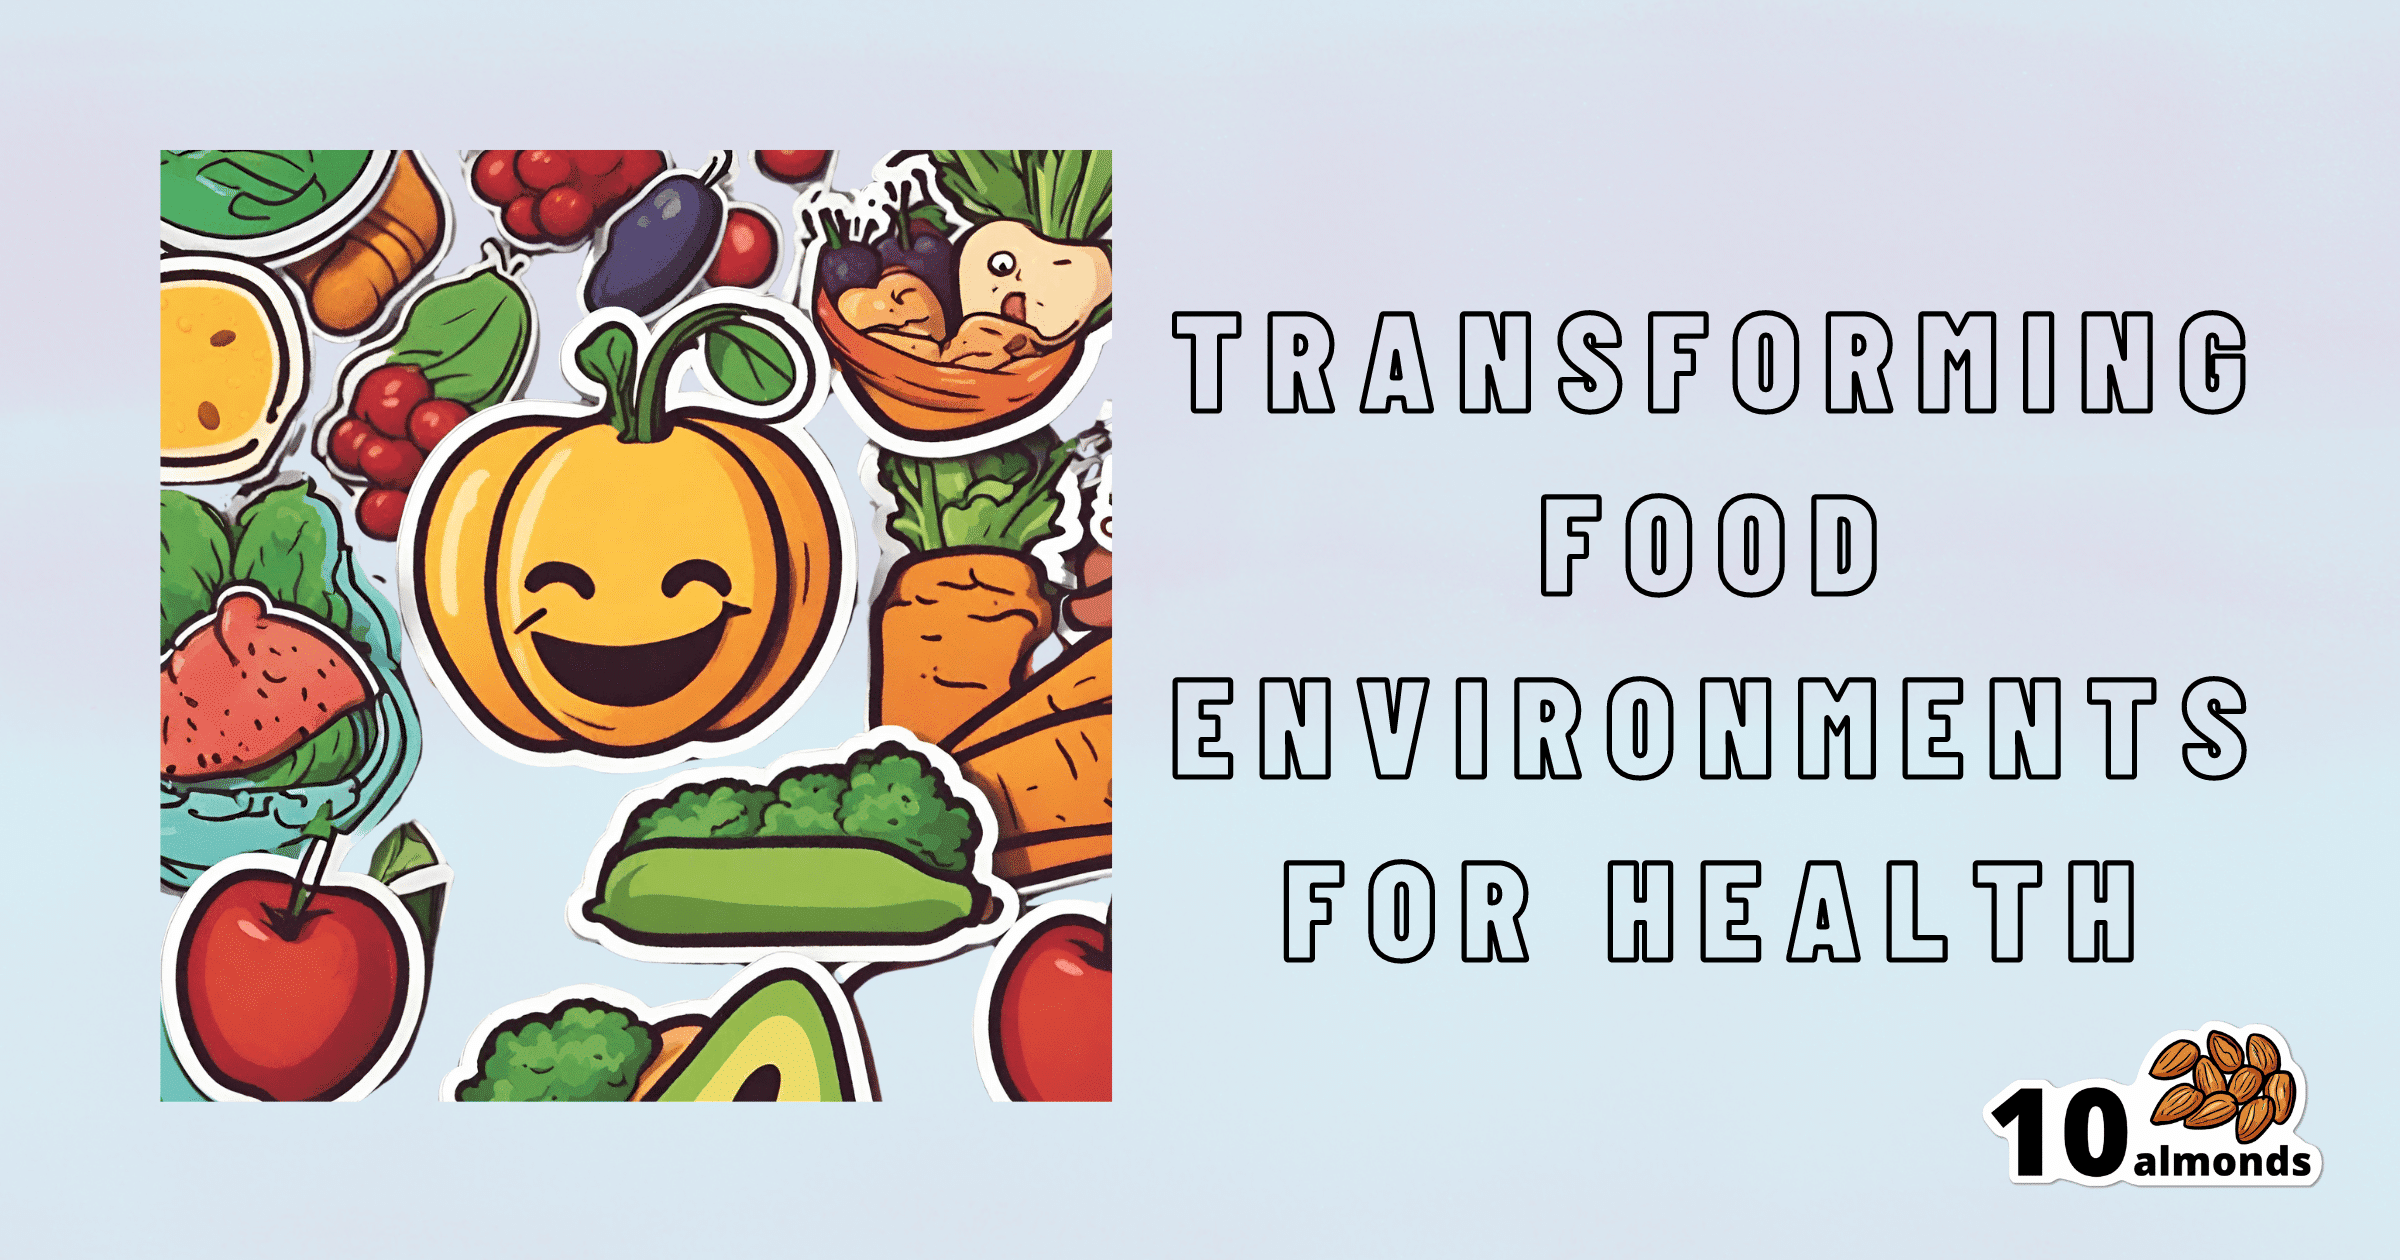 Promoting healthier eating by transforming food environments.